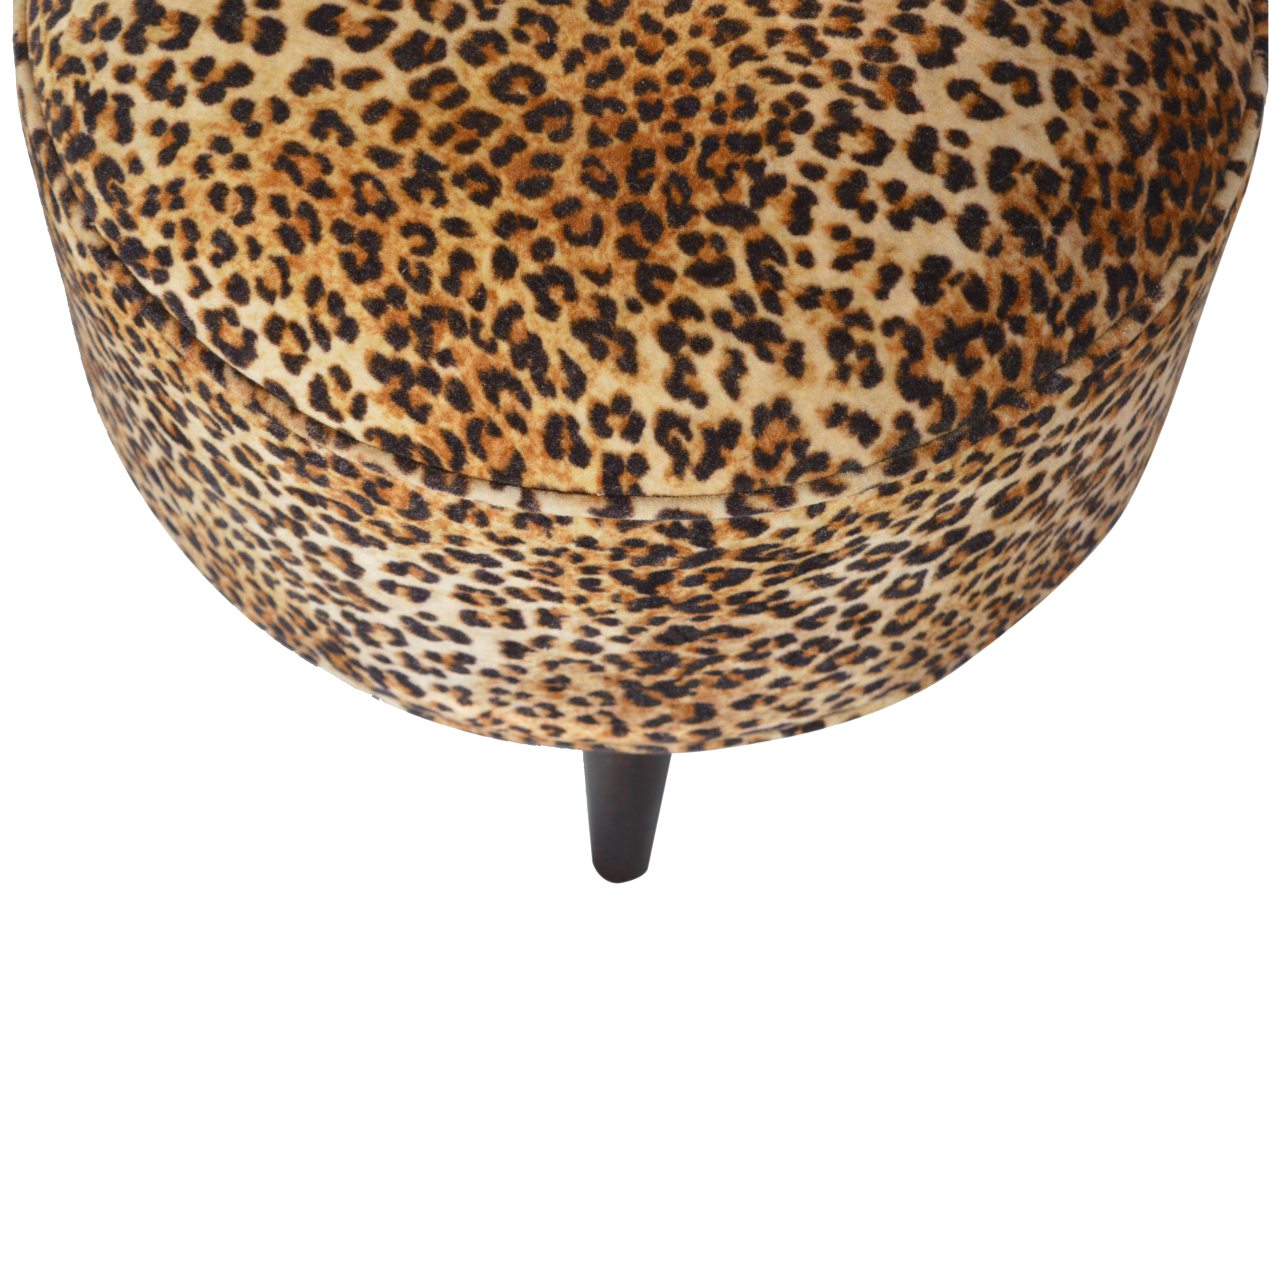 Solid Wood Leopard Print Velvet Footstool In Walnut Finish With Luxurious Cushioned Upholstery